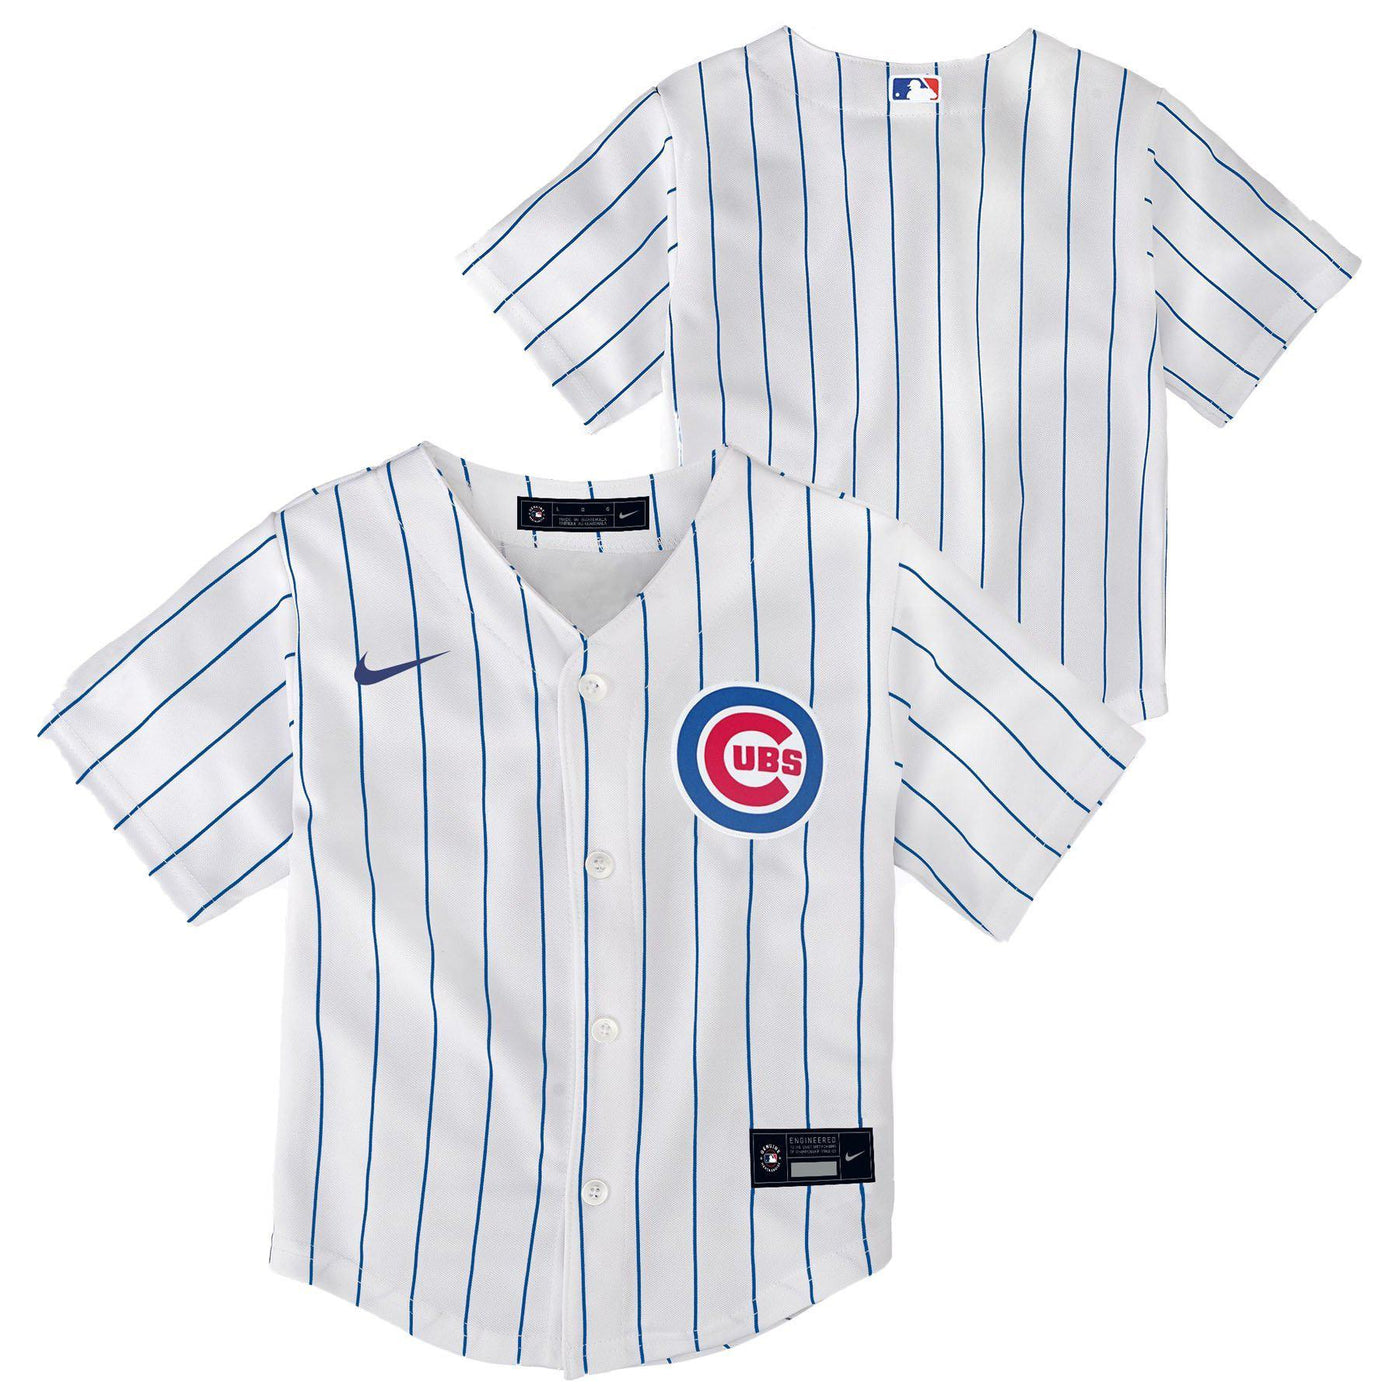 MLB Chicago Cubs City Connect Men's Replica Baseball Jersey.